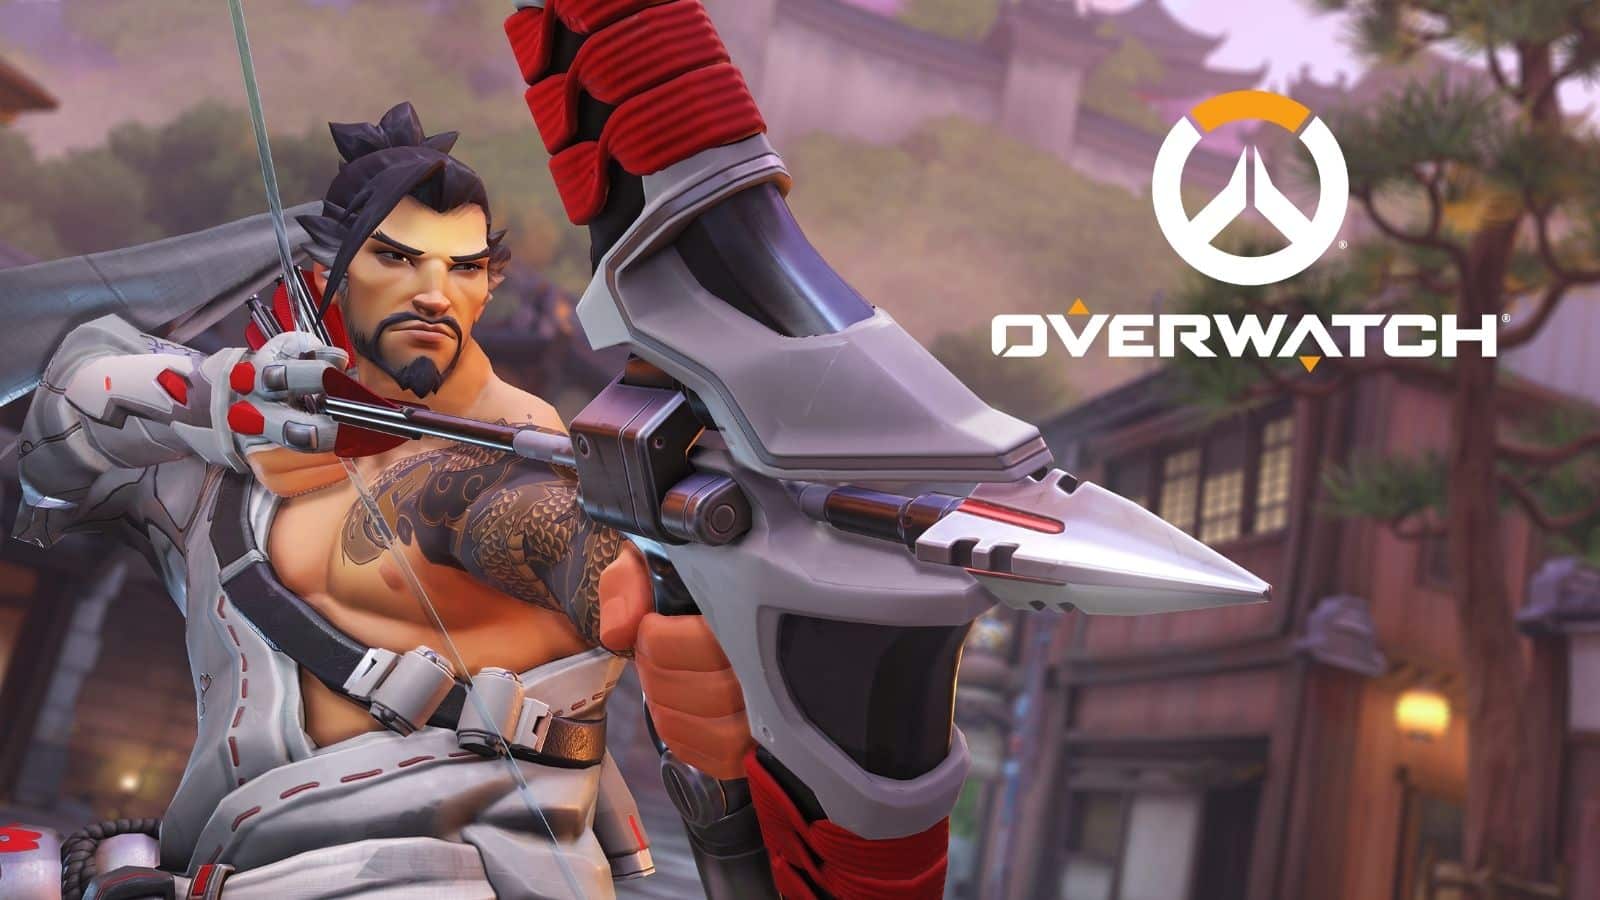 hanzo and ow logo